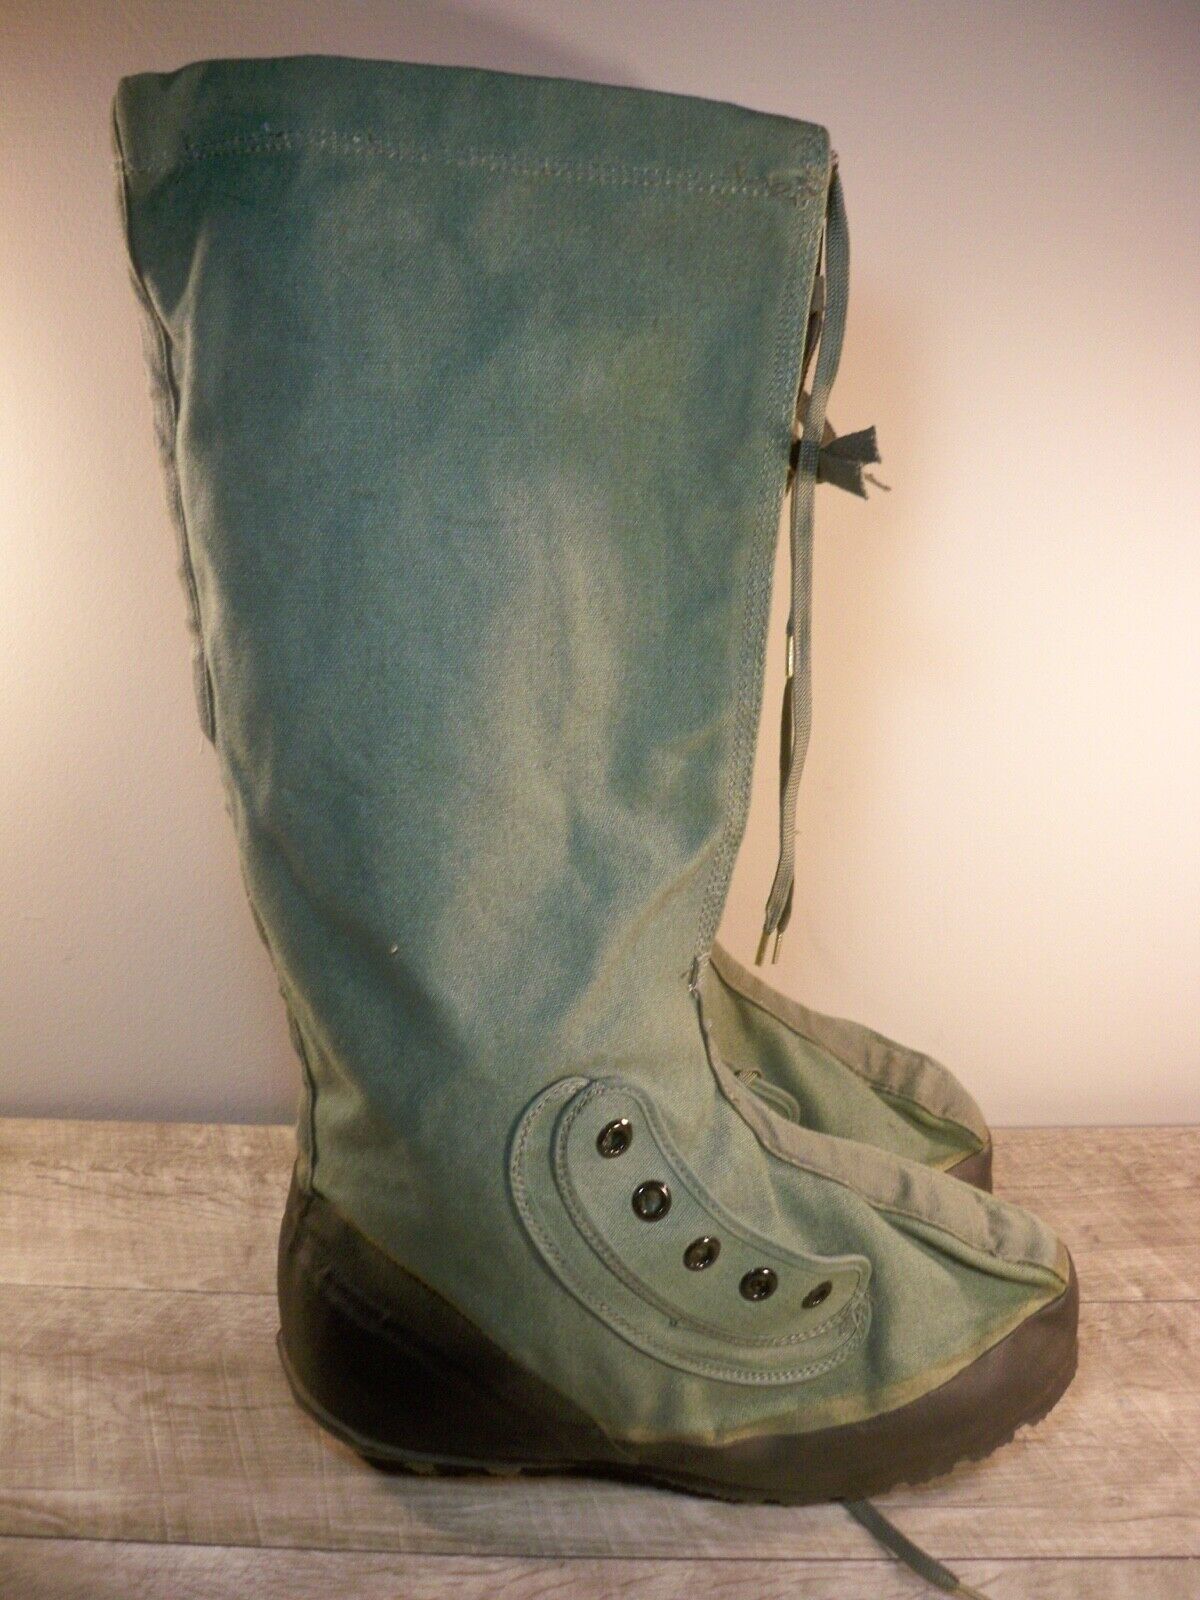 New Old Stock US Military N-1B Arctic Extreme Cold Weather Mukluk Boot Men 9-10 